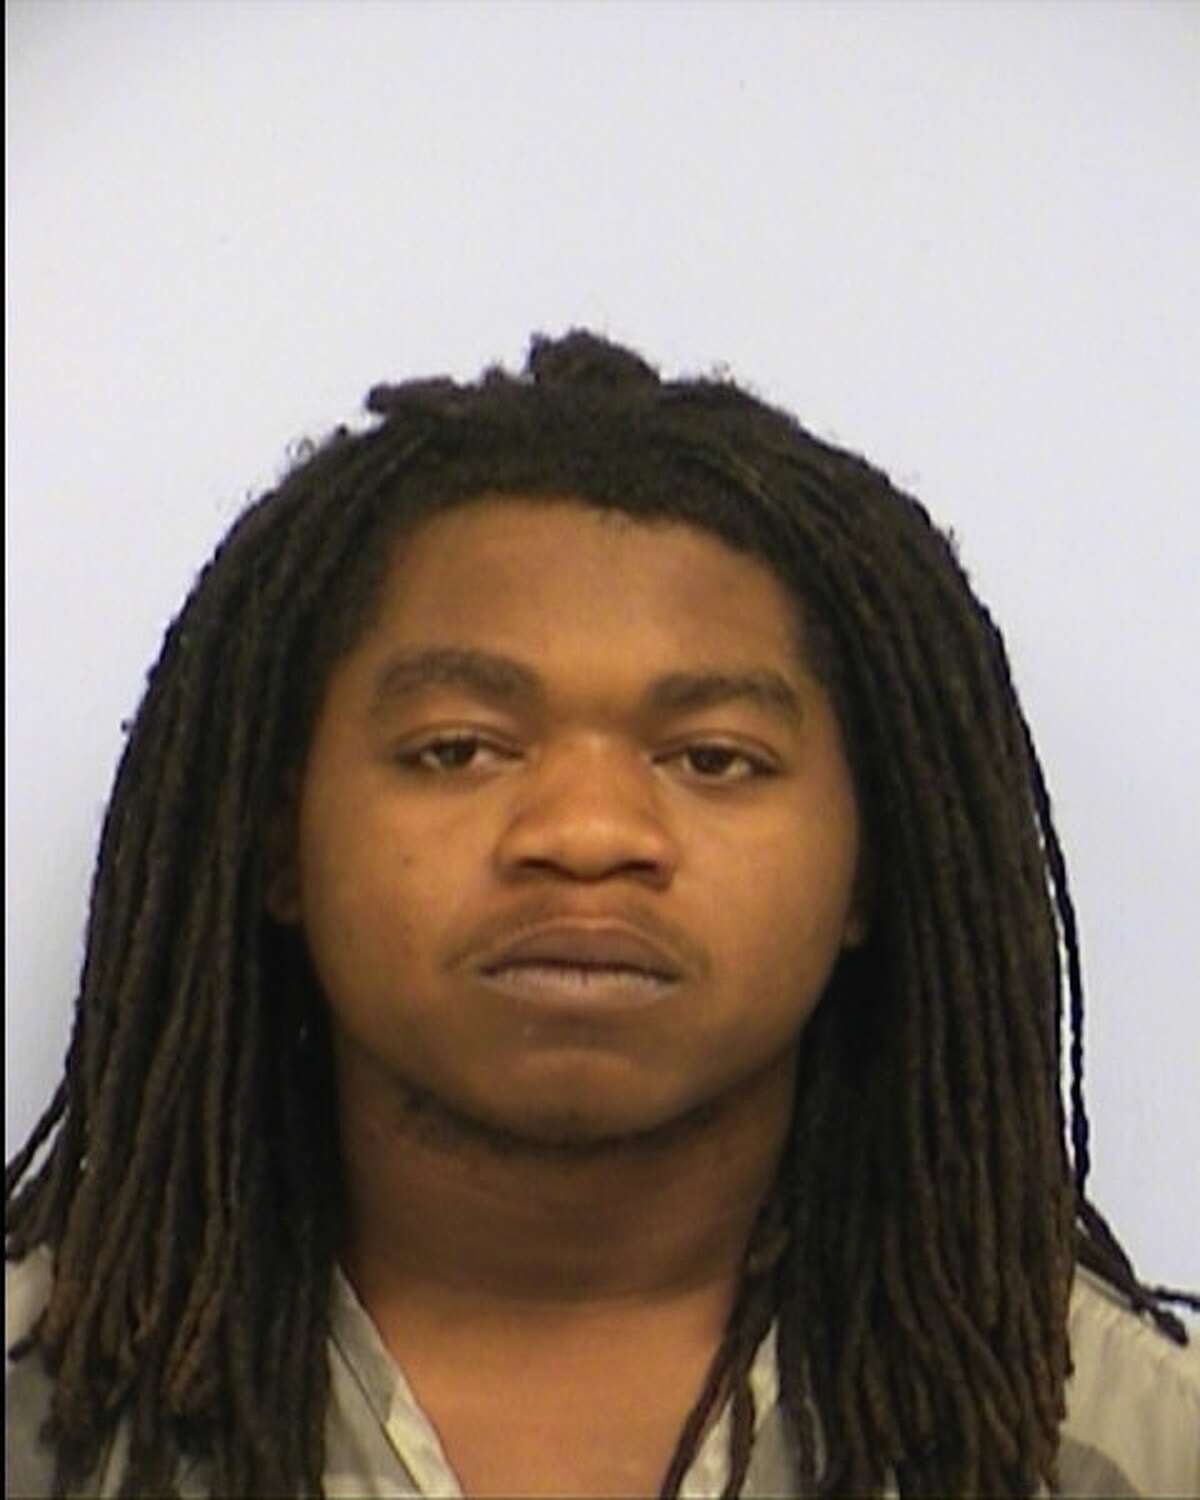 Rashad Owens, the suspect in the SXSW wreck, is seen in an undated booking mug provided Friday, March 14, 2014.